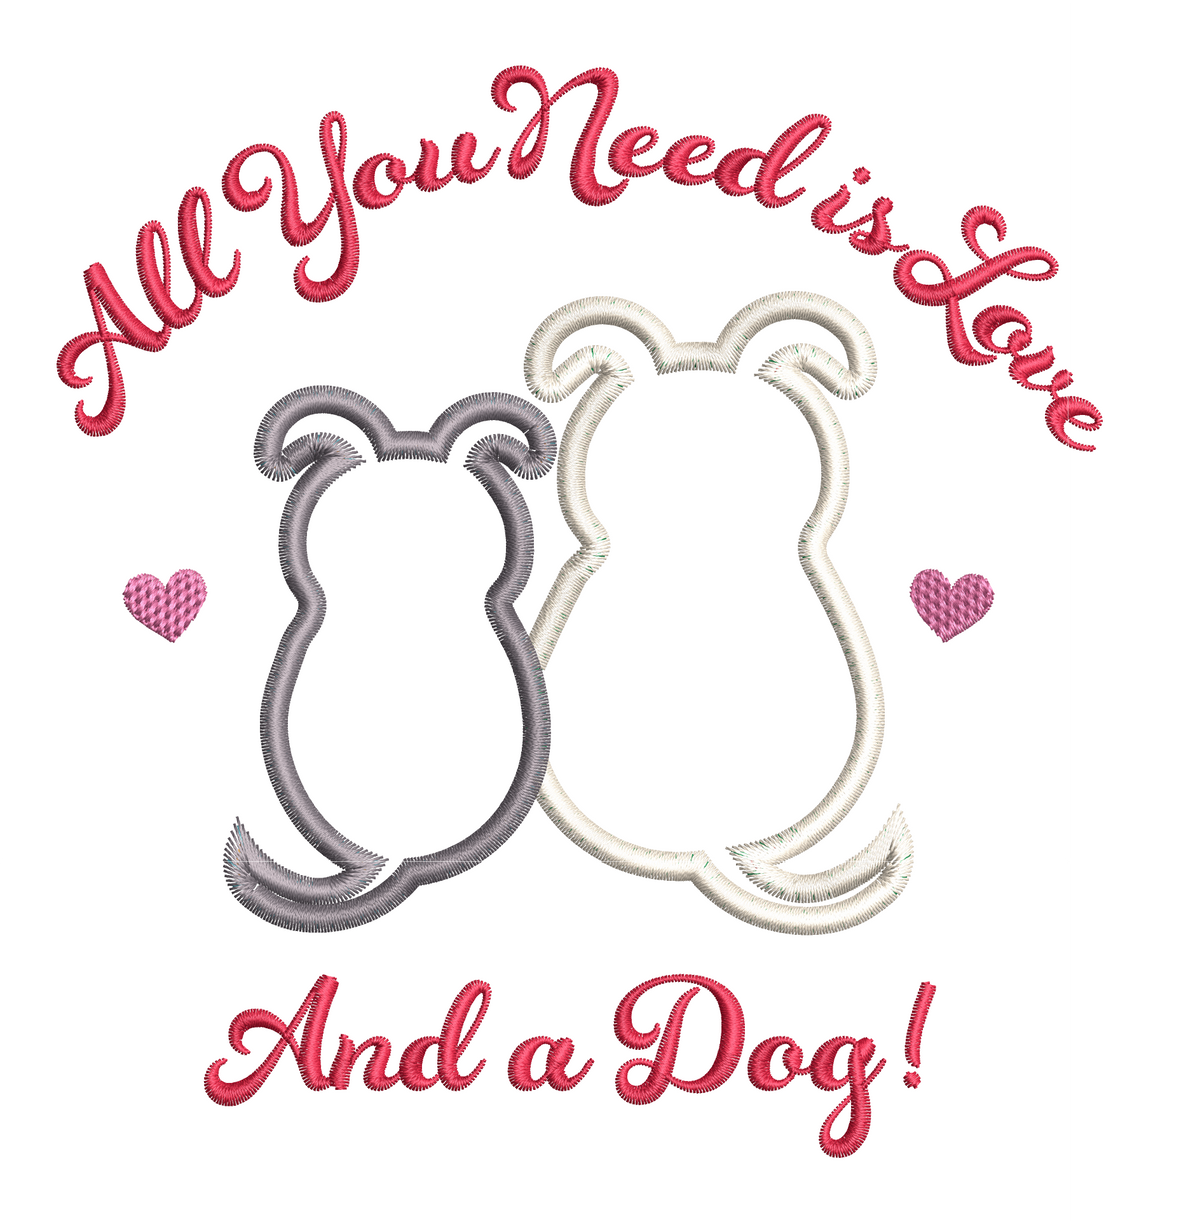 All You Need is a Love (and a Dog) Applique